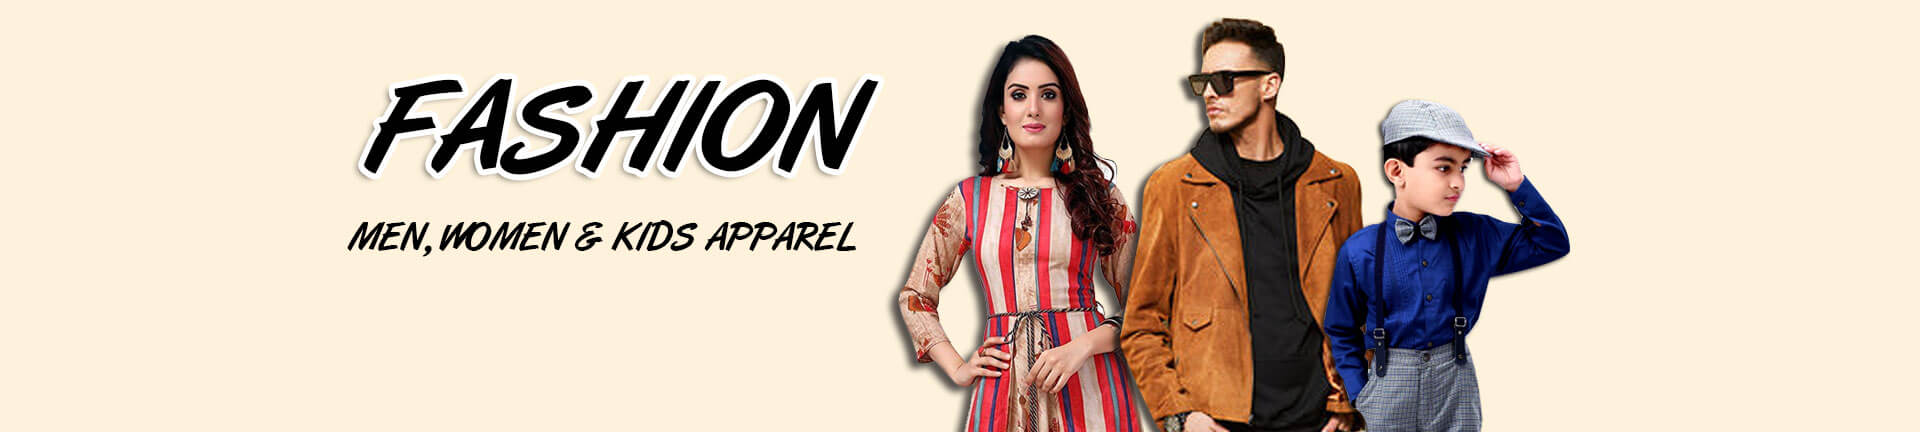 Best Fashion Product for Men, Women & Kids with Price In Pakistan